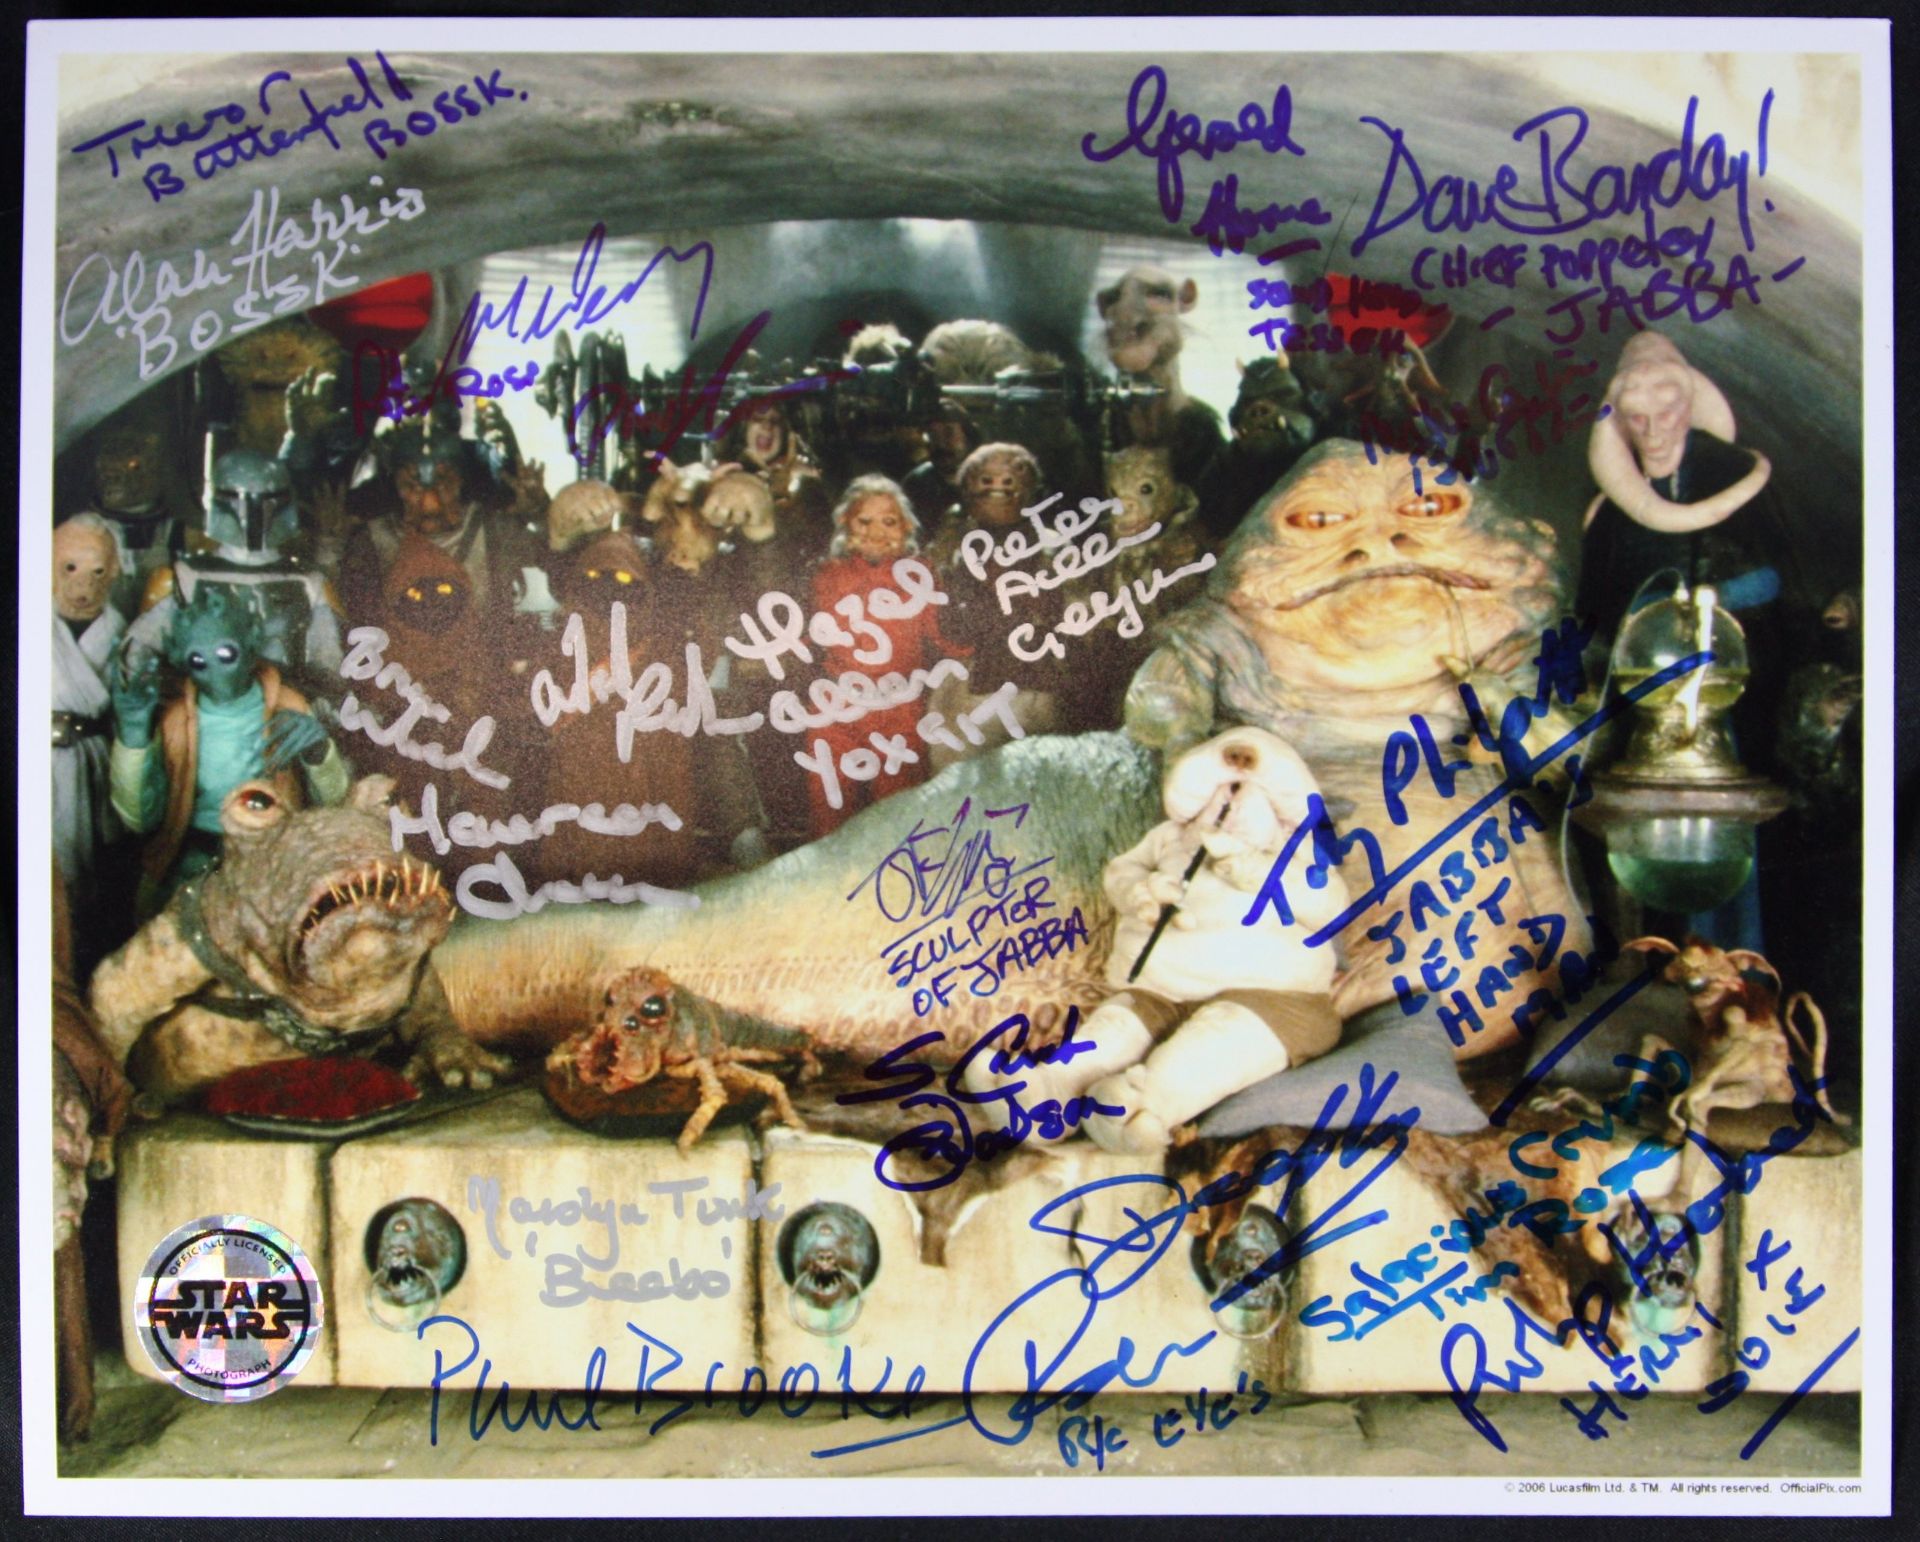 STAR WARS - RETURN OF THE JEDI - JABBA'S PALACE OFFICIAL PIX SIGNED X21